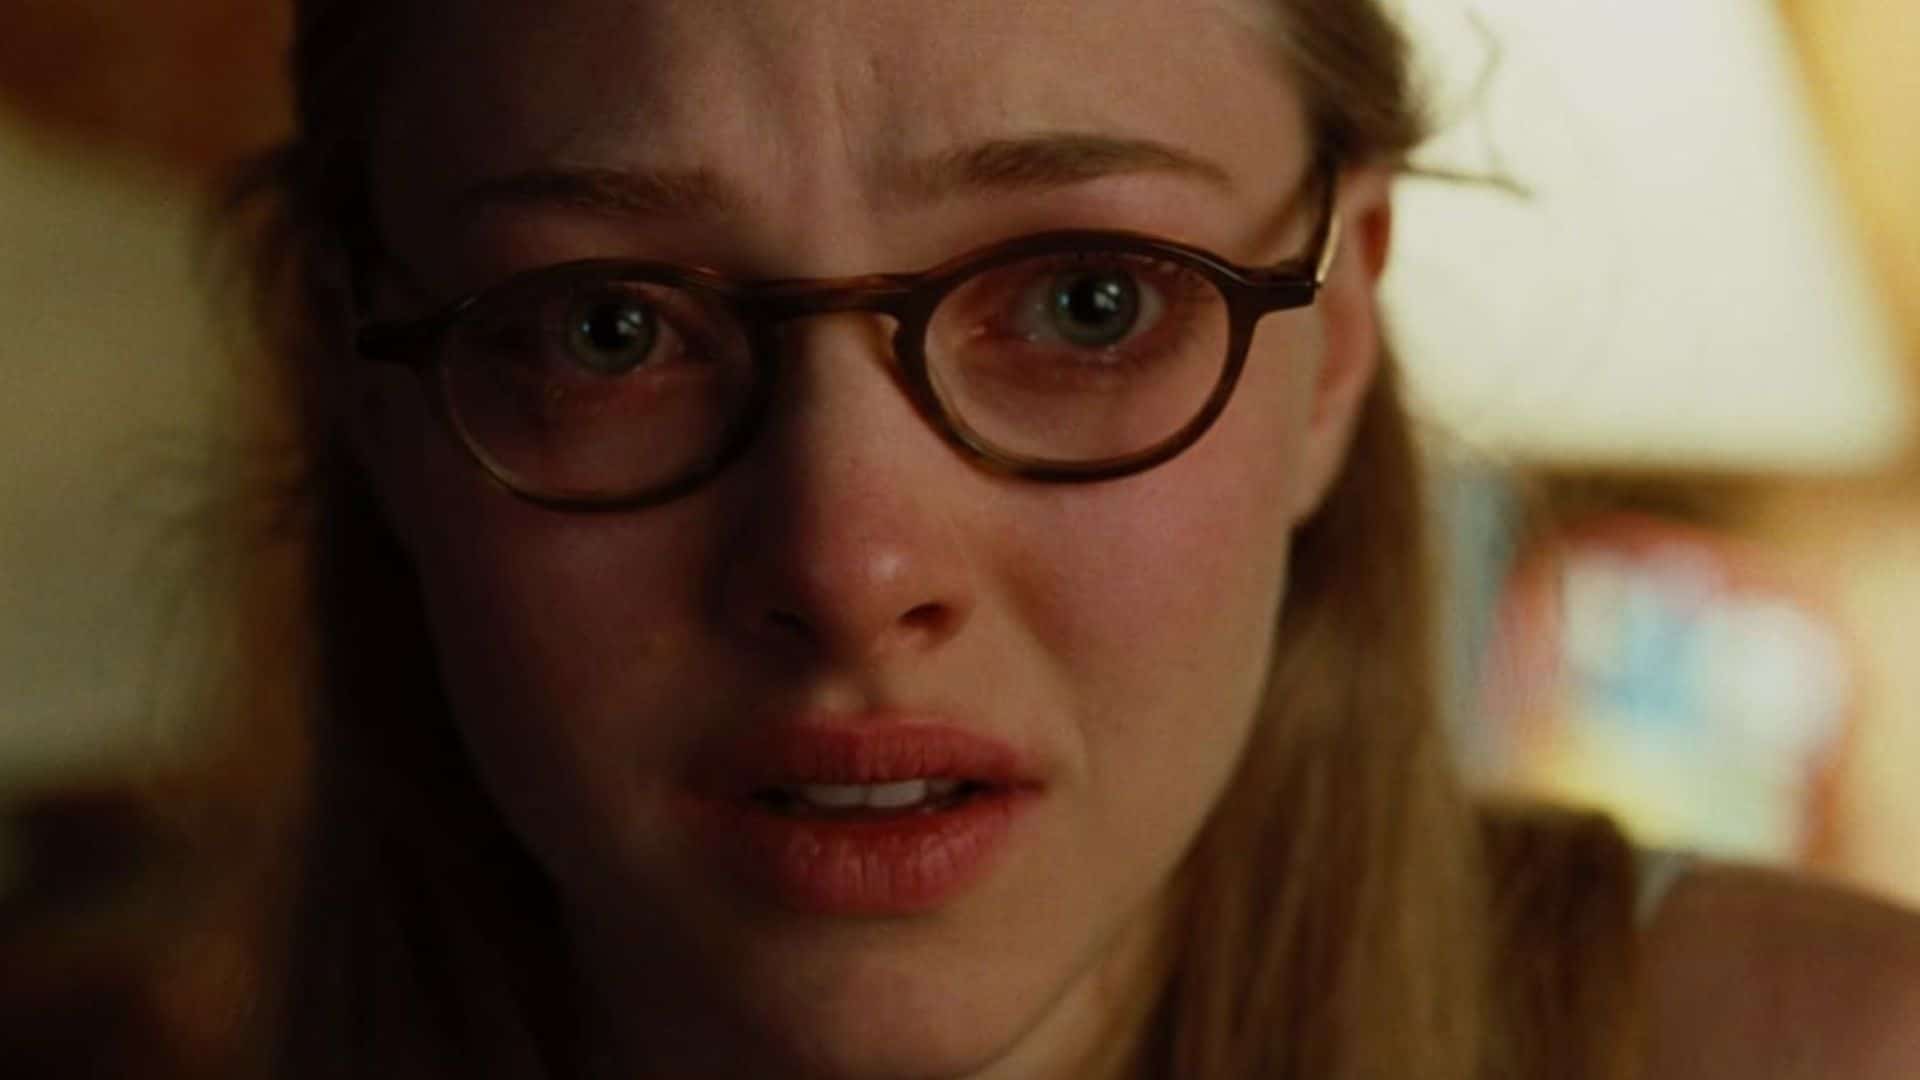 A woman crying and wearing brown glasses in this image from Fox Atomic.